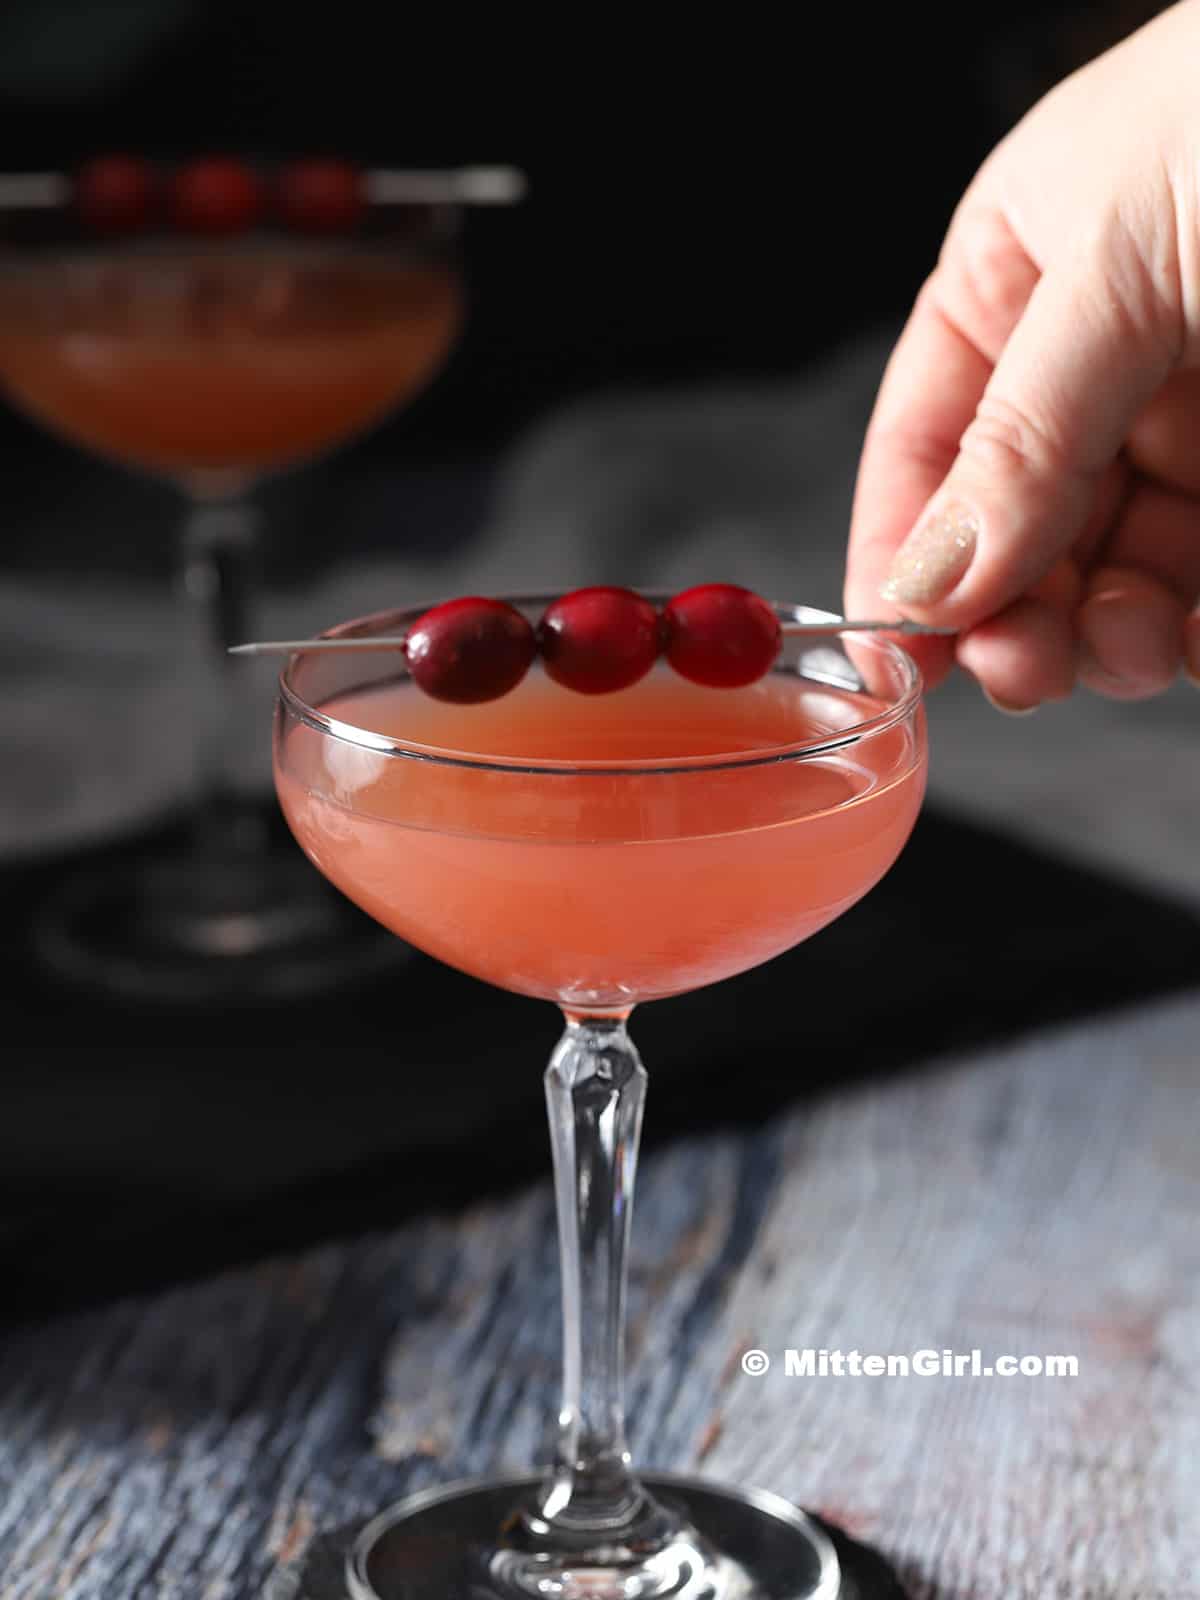 A hand garnishing a cocktail with cranberries.